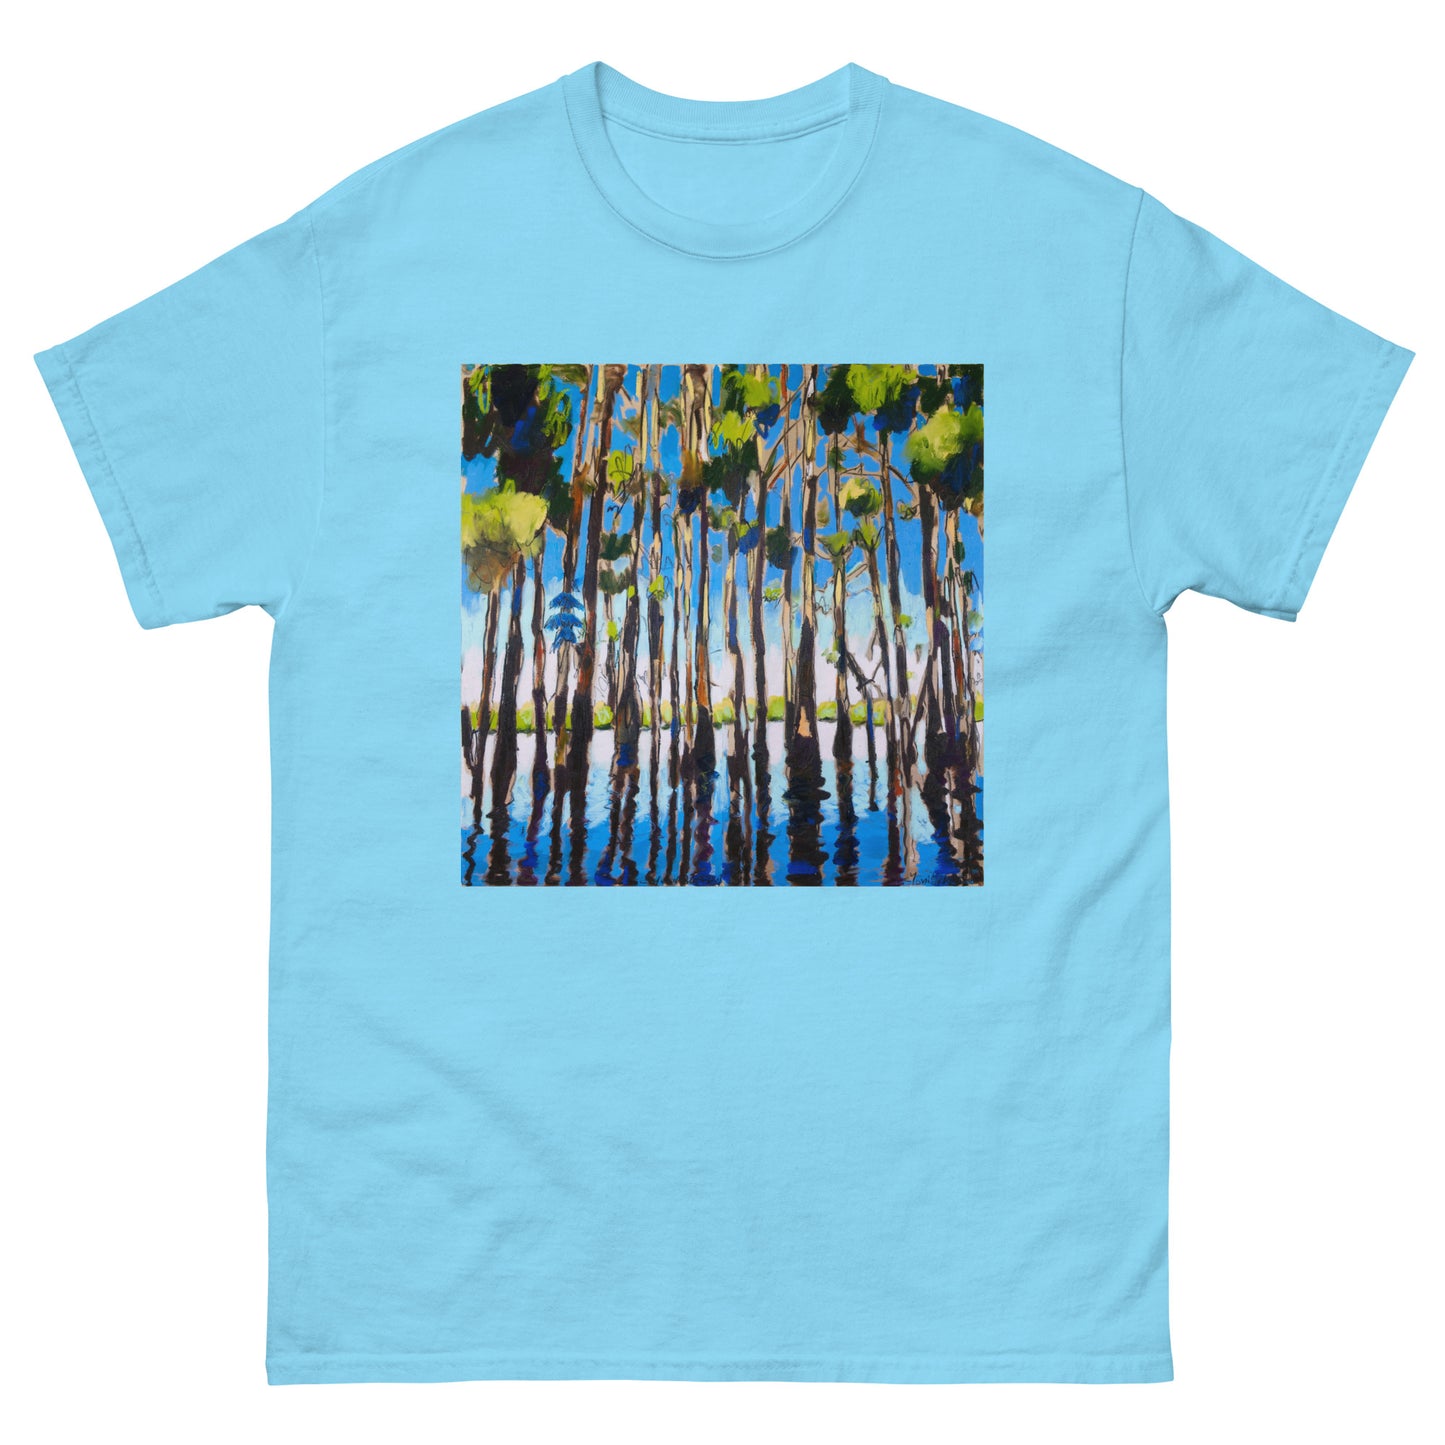 Square Cypress Reflections Unisex classic tee